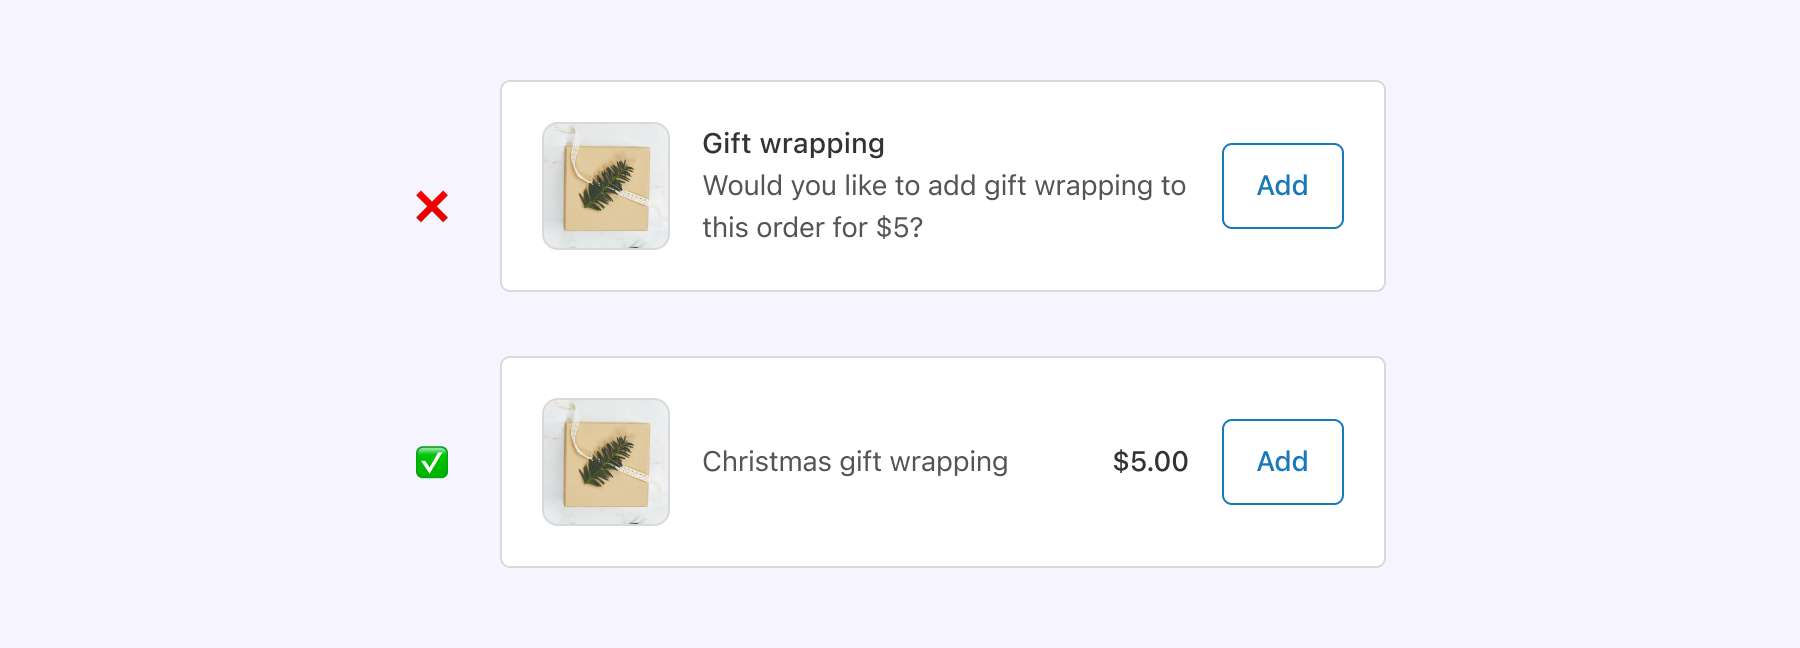 An example what not to do, which shows a gift wrapping option where the price is included in the description. An example of what to do for this scenario, where the price for the gift wrapping option displays clearly next to the button for adding this option